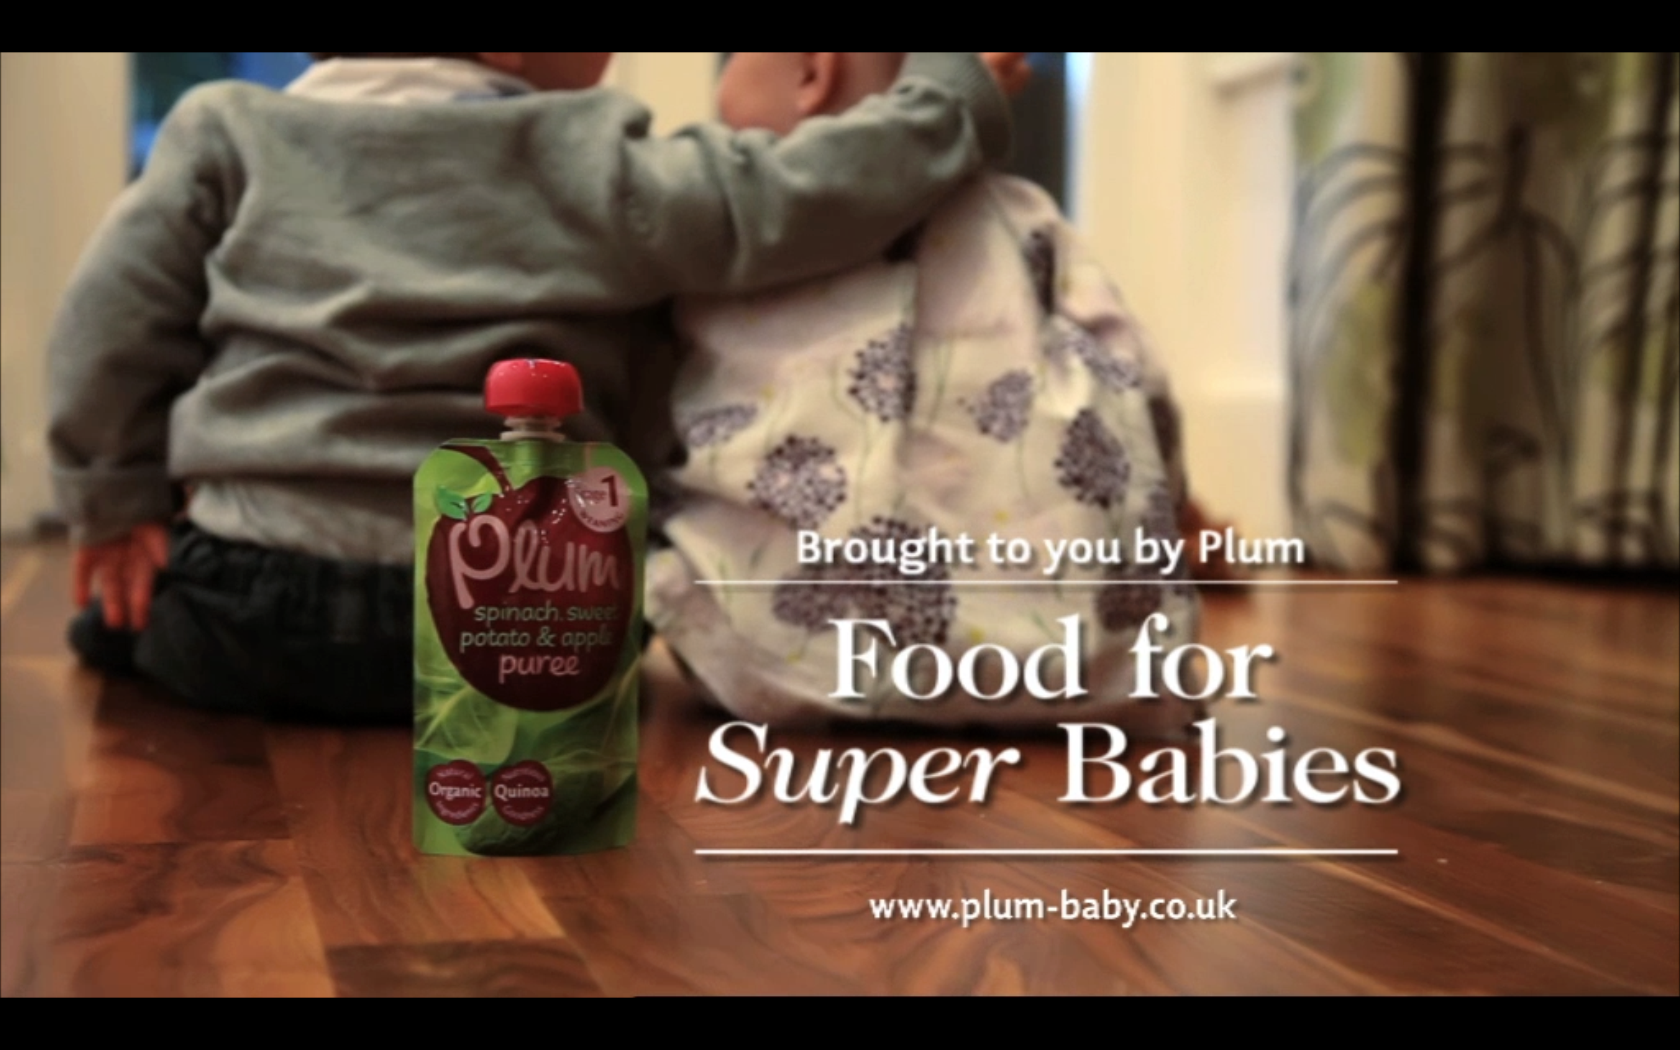 Plum baby food launches £1m TV campaign